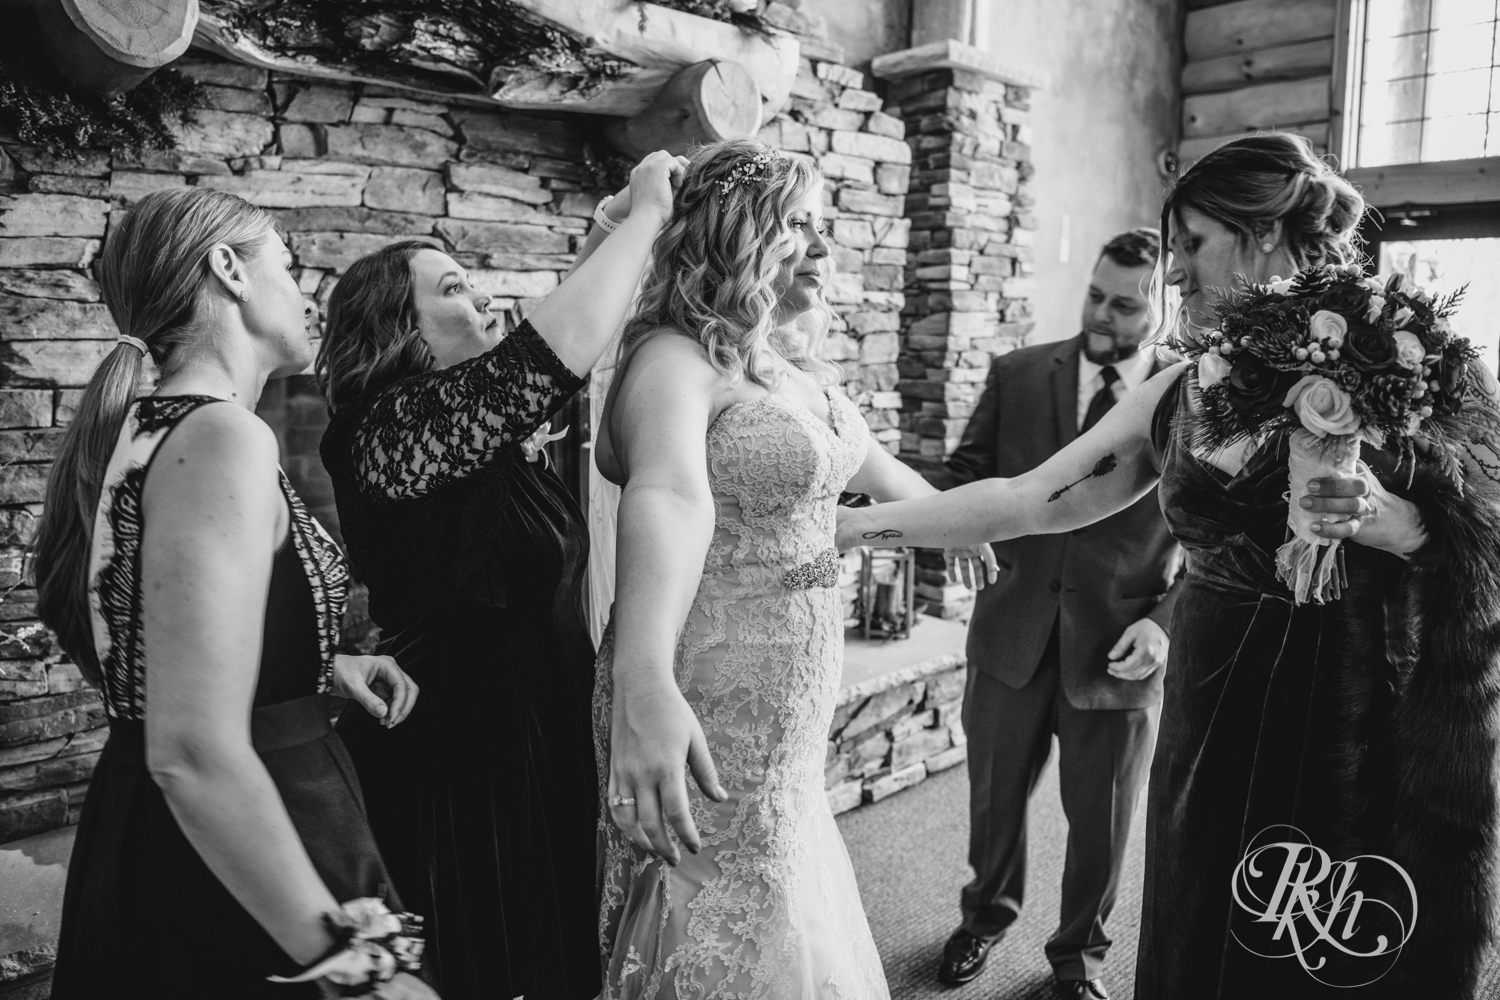 Wedding party helps bride during winter wedding at Whitefish Lodge in Crosslake, Minnesota.